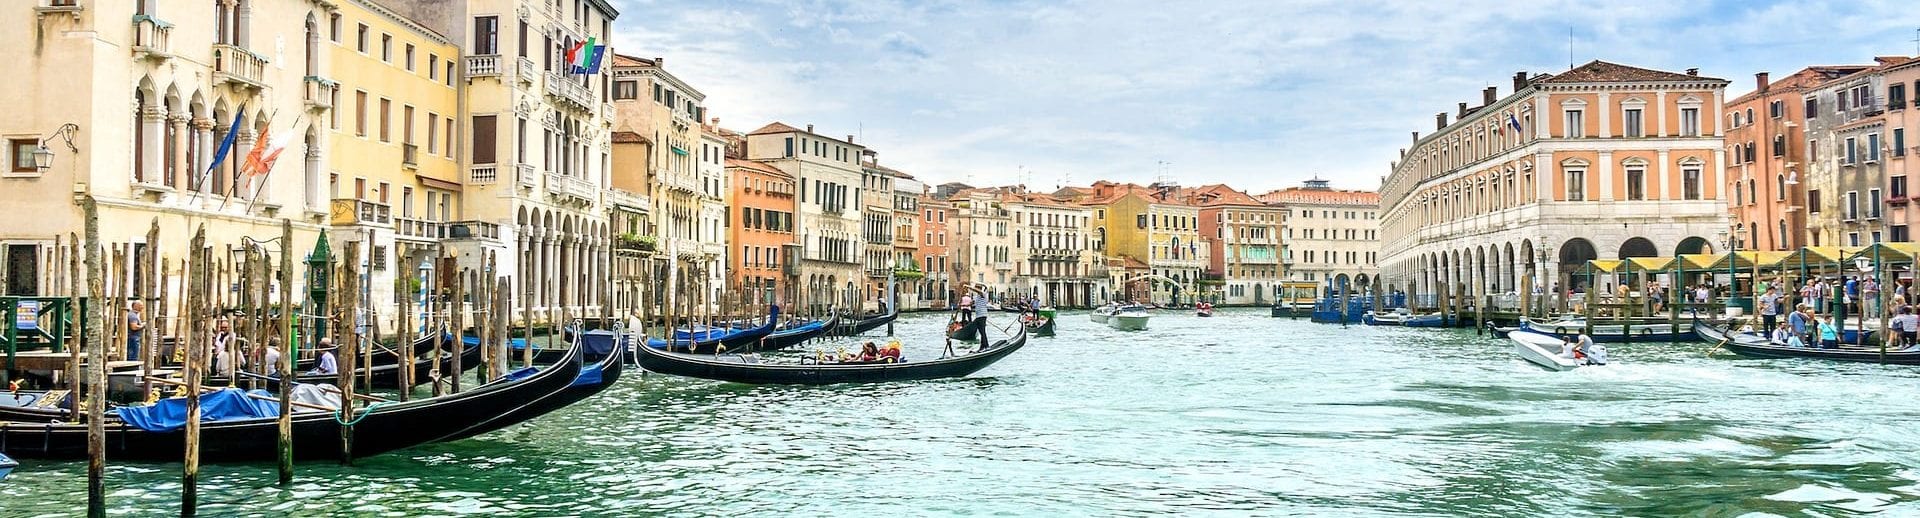 Travel Guides & Things to Do in Venice - Welcome Pickups